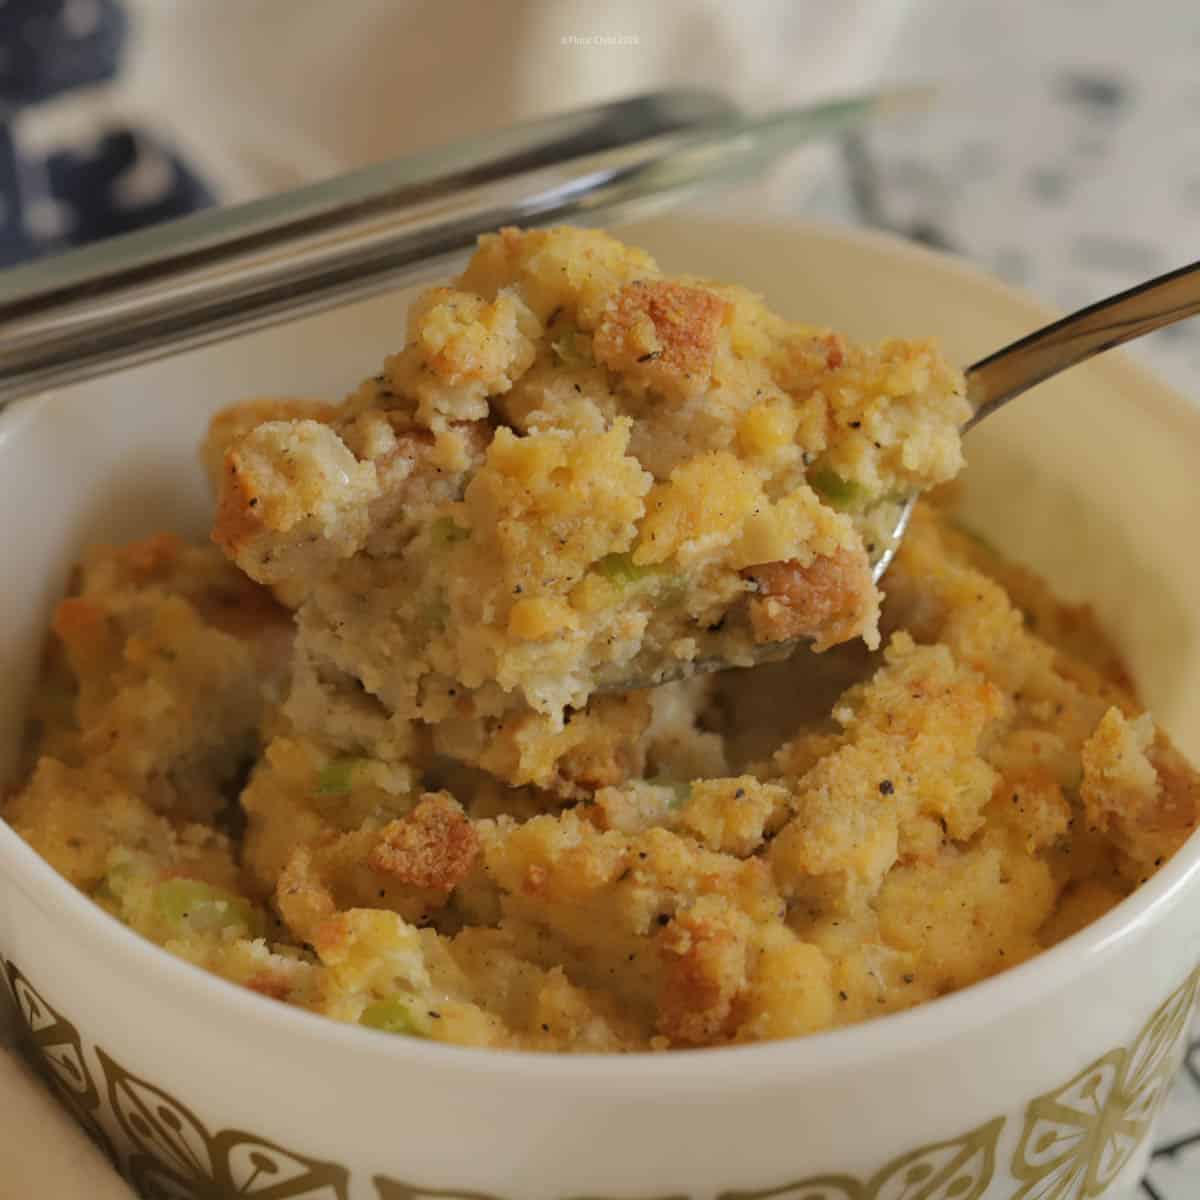 Cornbread stuffing in a white casserole dish with a spoonful being lifted out.